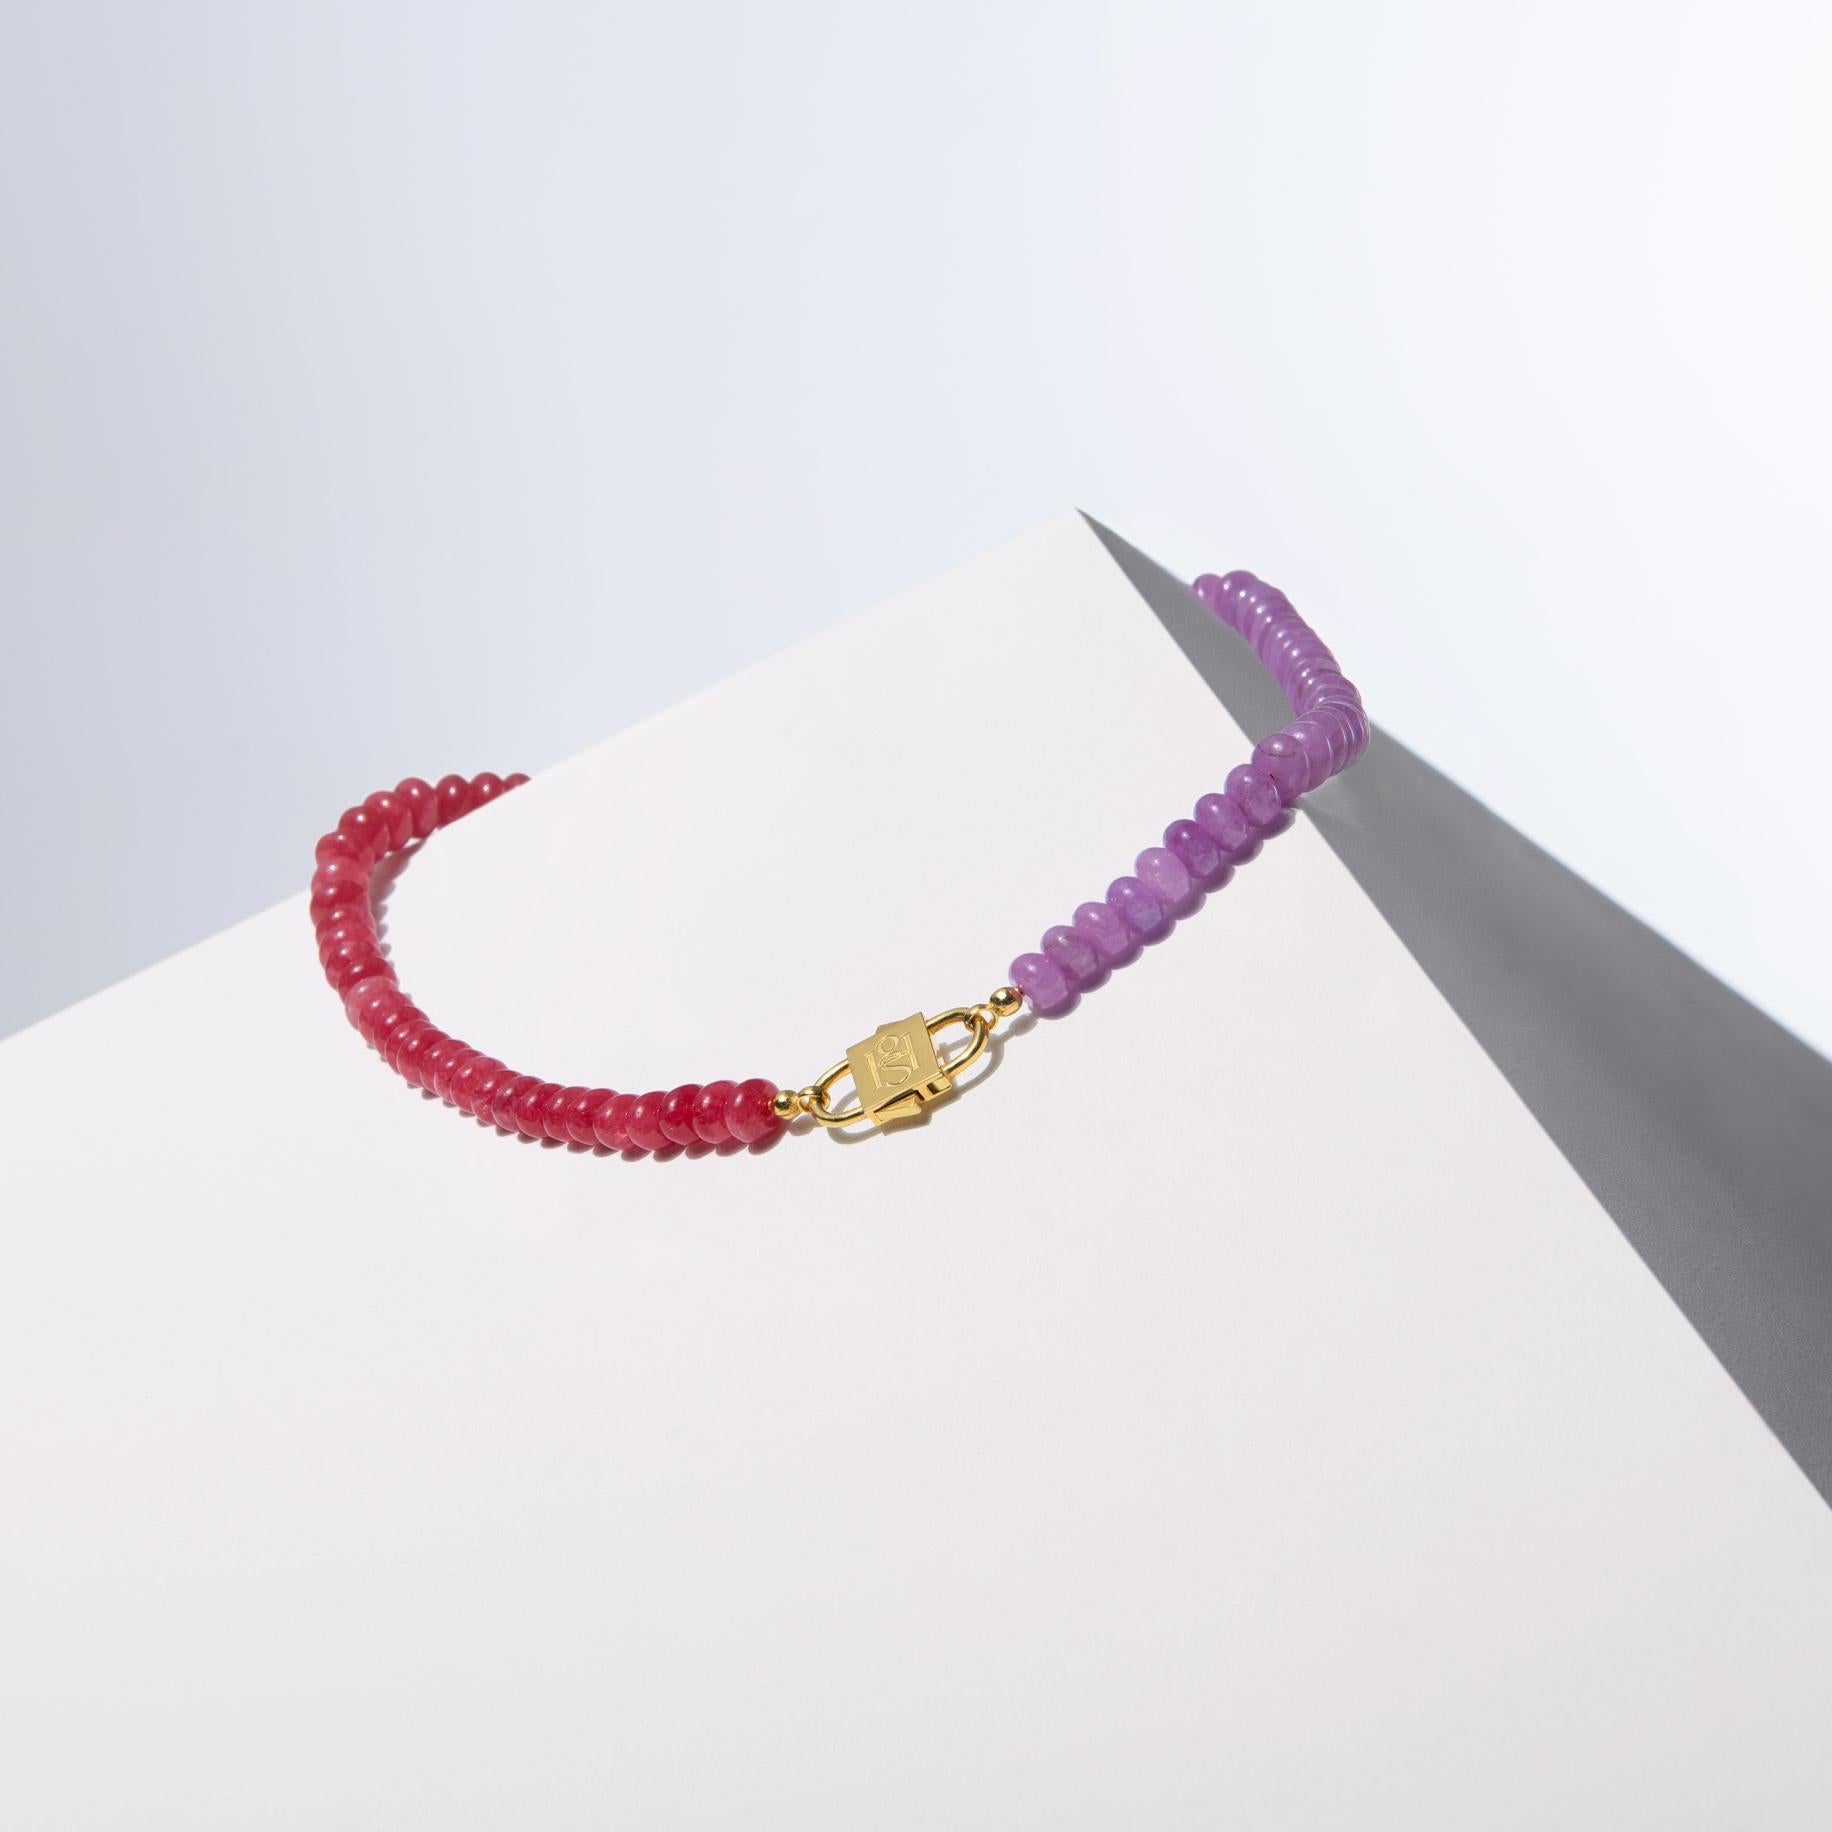 - Masterfully crafted with Rhodonite and Kunzite colored Jade beads, each uniformly cut to 8 mm, balancing elegance and consistency.
- The vibrant pink and purple hues of the beads create a captivating contrast, making the necklace a standout